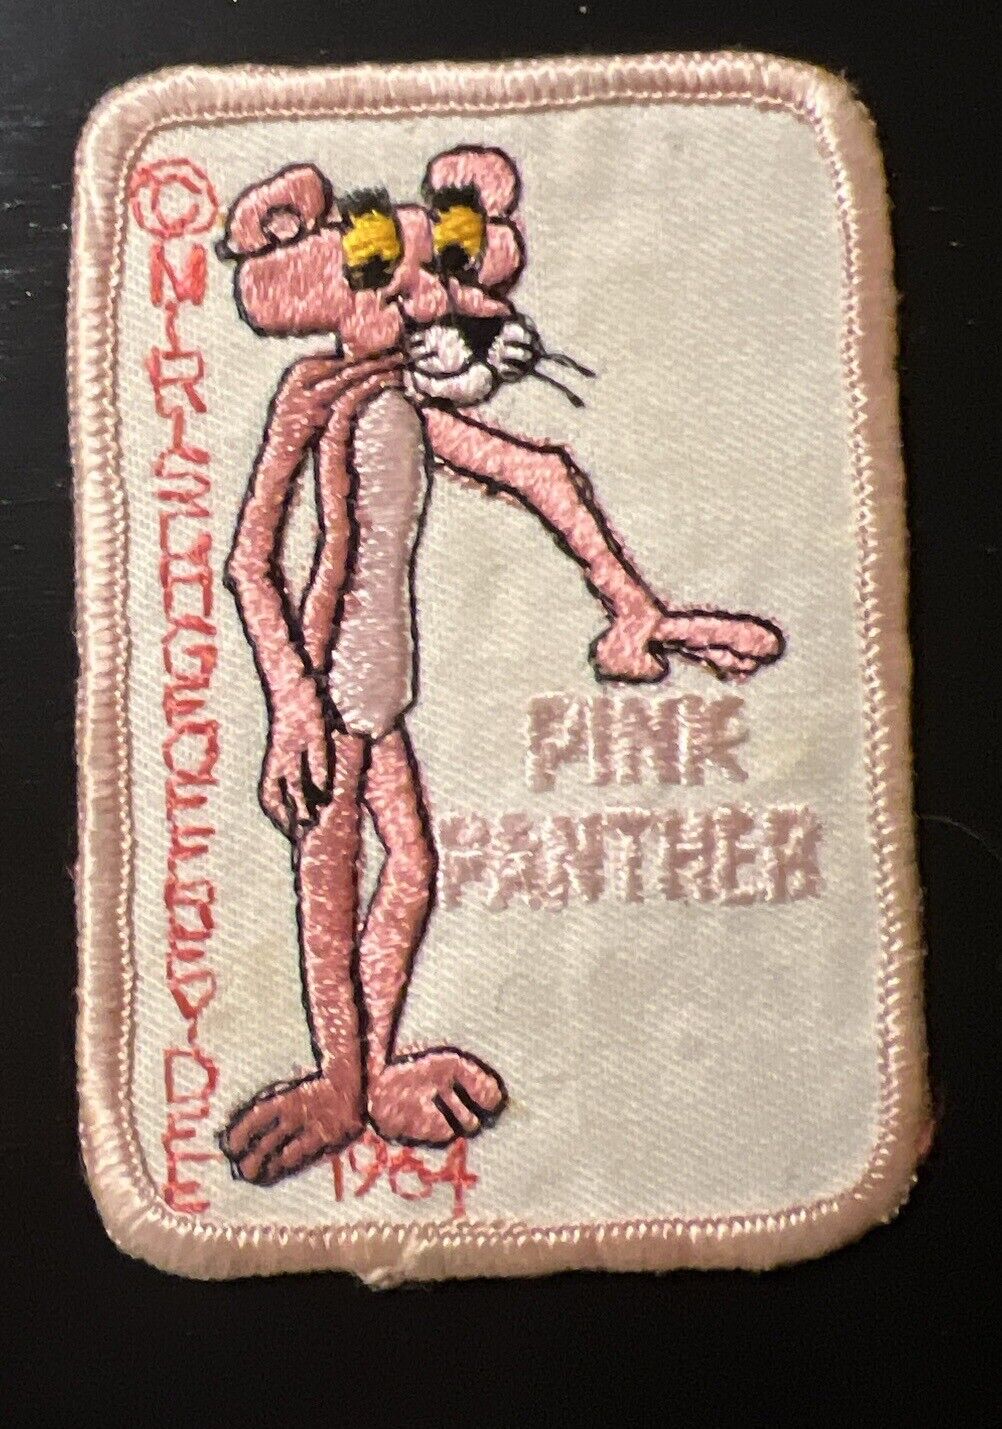 Vintage Collectible 1964 PINK PANTHER Embroidery Custom Patch